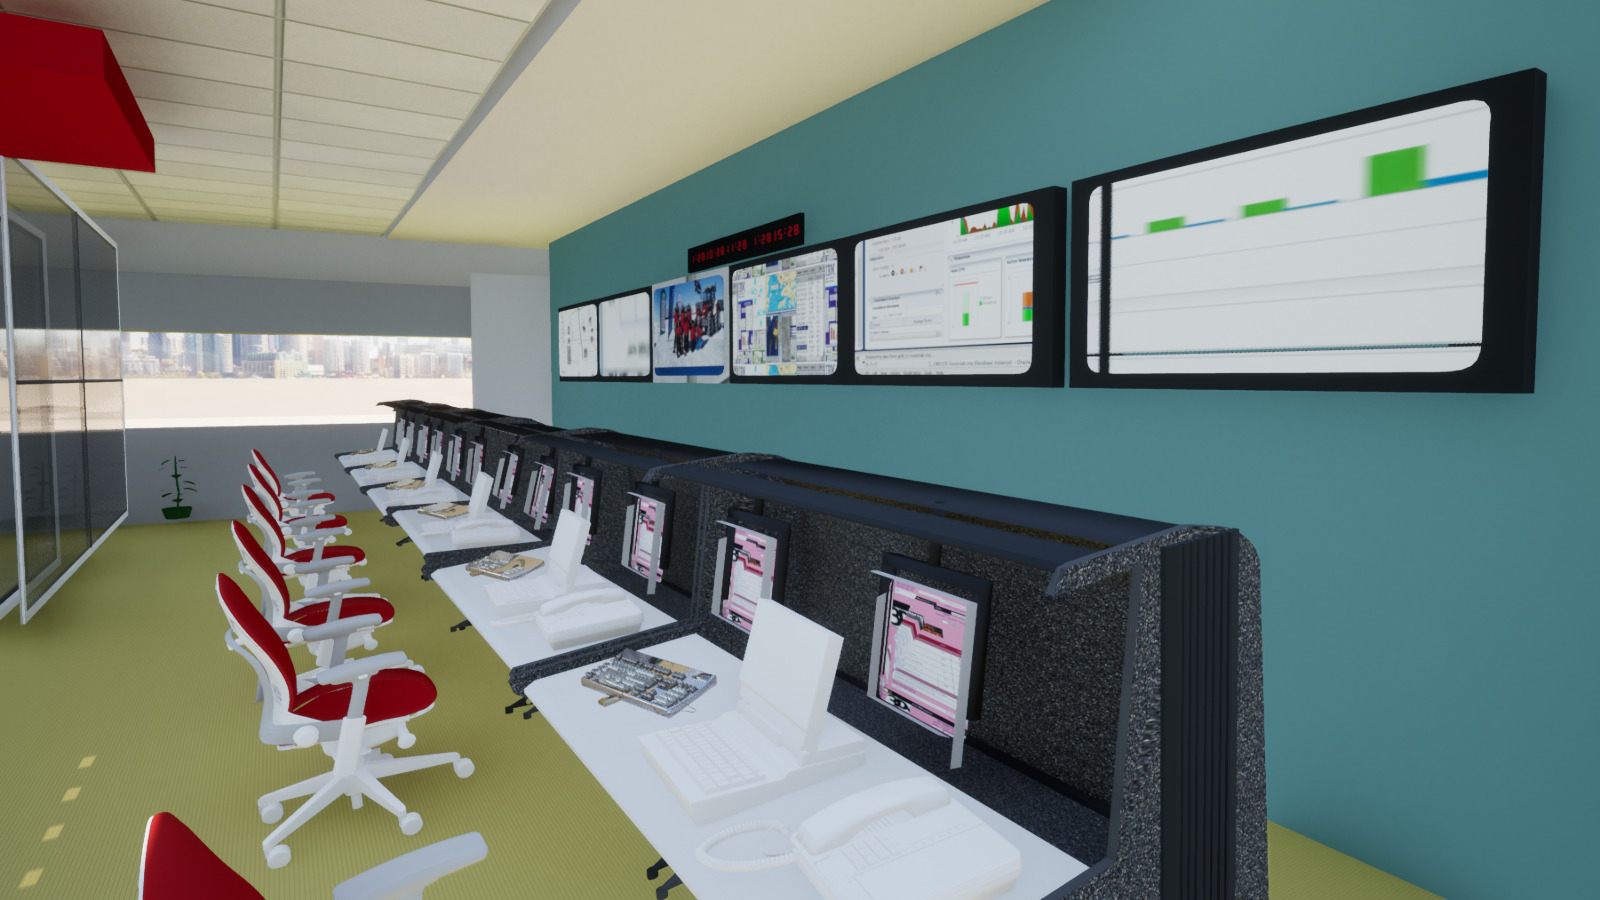 oblique view, from the right, of operator workstations with individual computer systems, in a row which also faces a number of larger wall-mounted screens for shared information